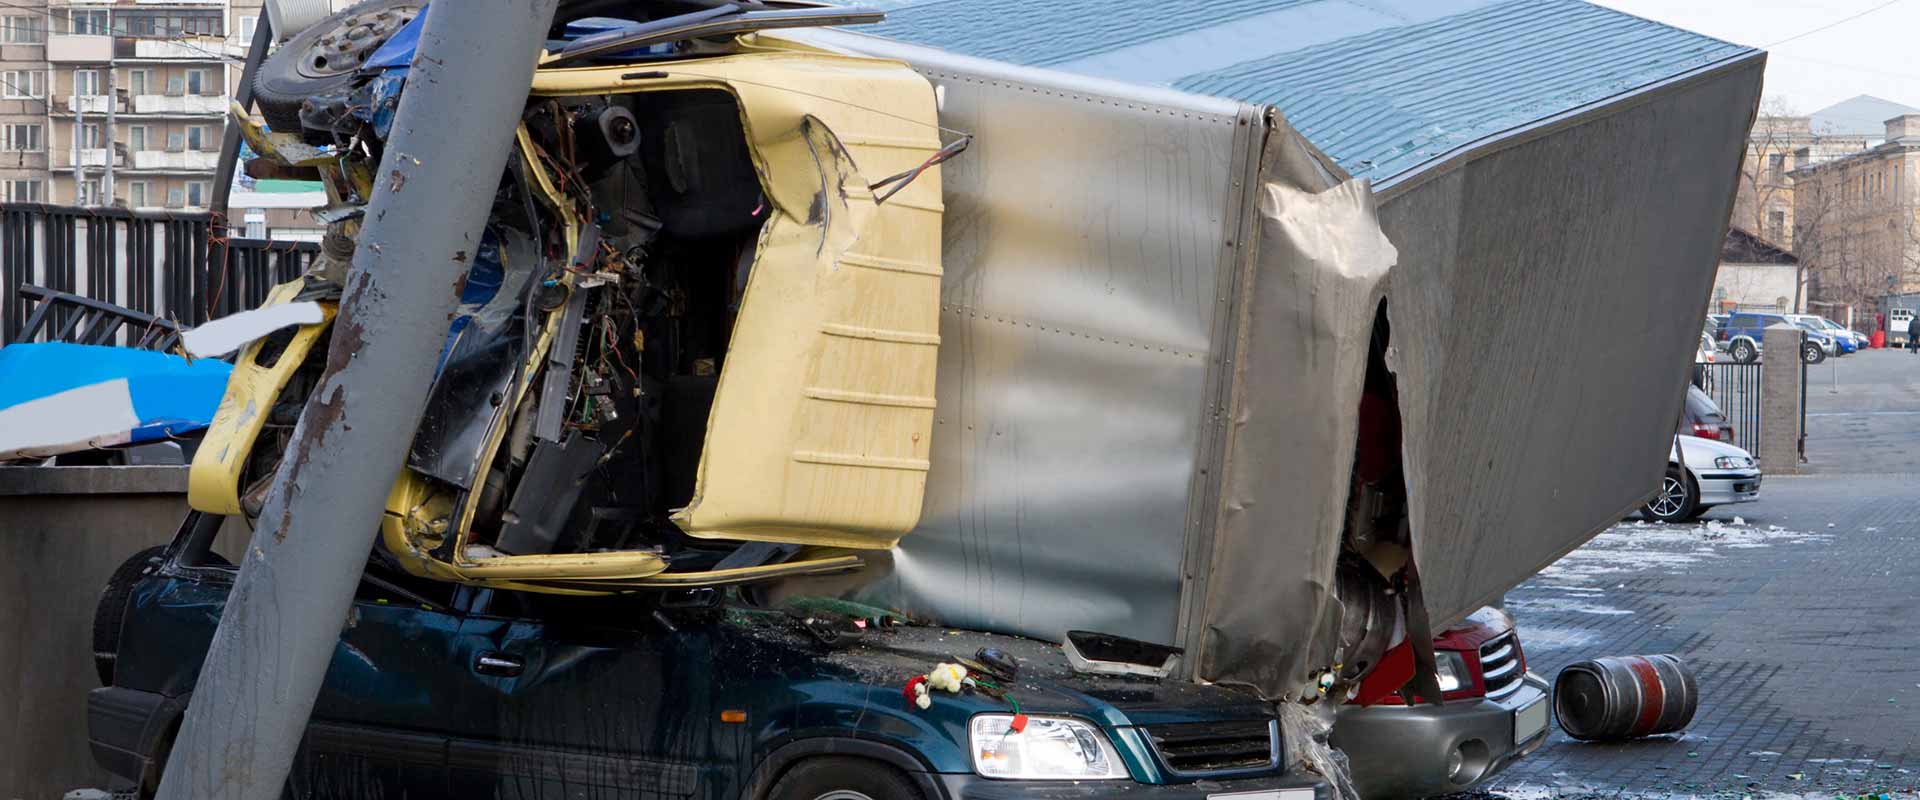 louisville ky overloaded truck accident lawyer